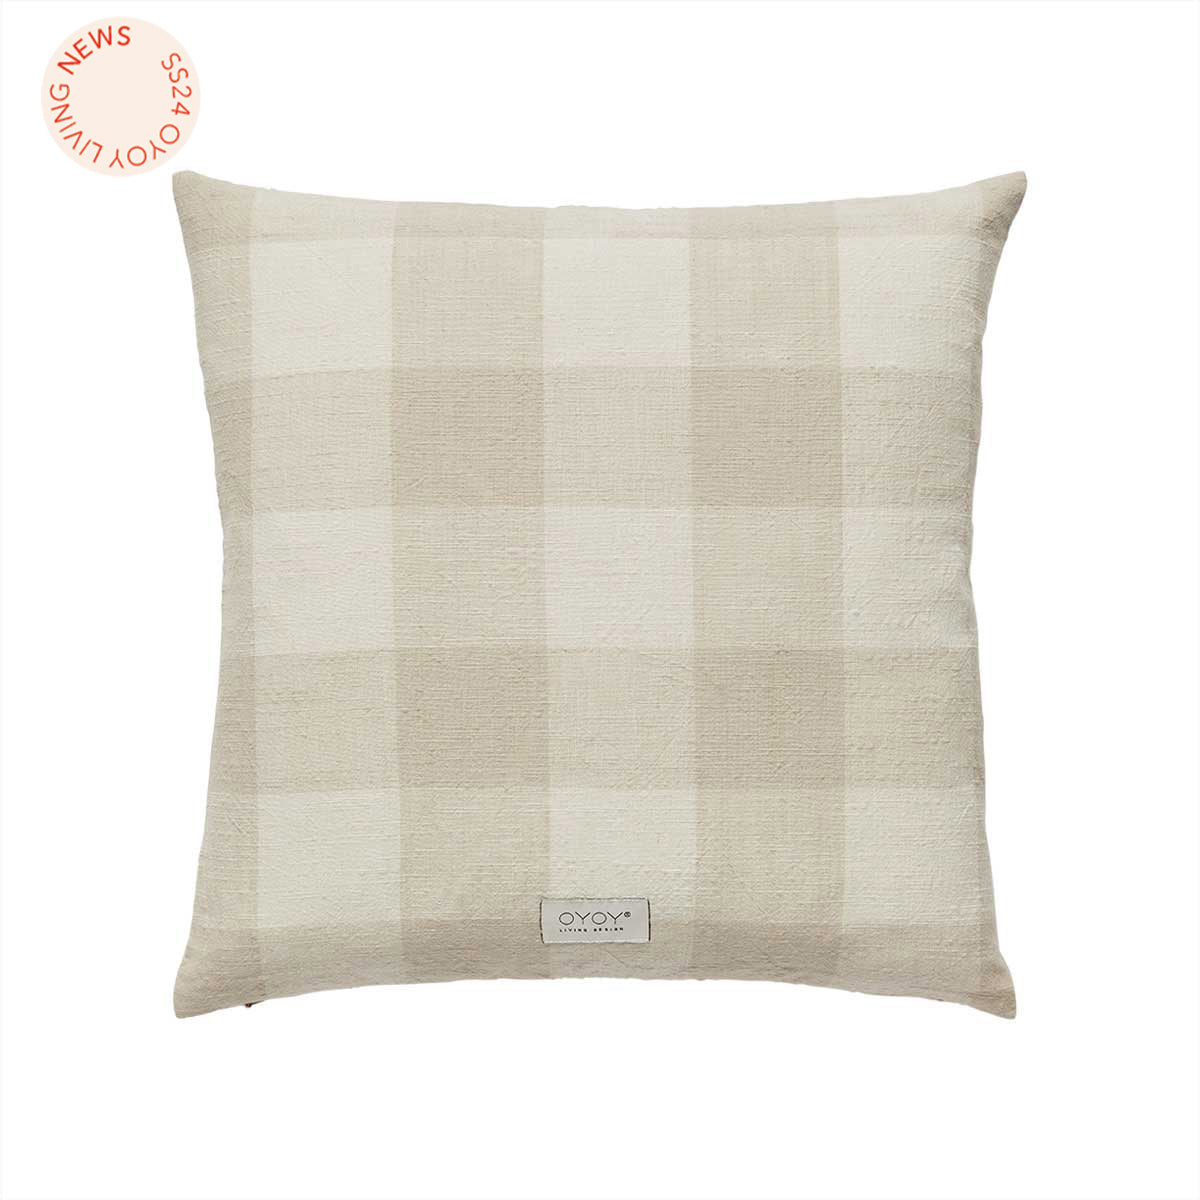 OYOY LIVING Chess Cushion Cover Square Cushion Cover 306 Clay